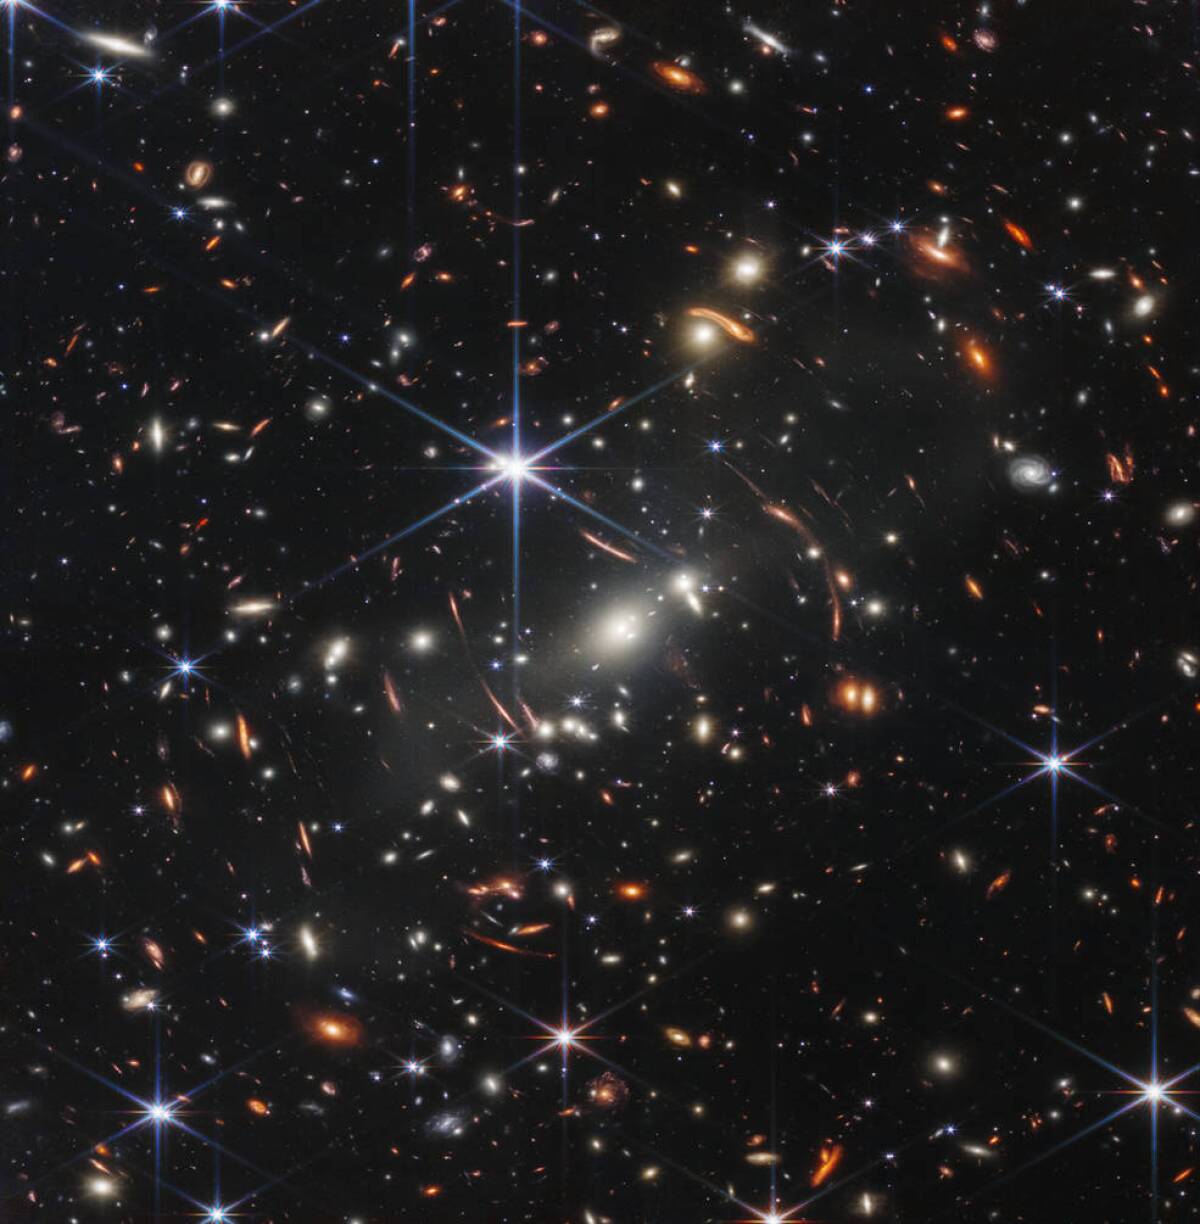 A space telescope image shows galaxies.